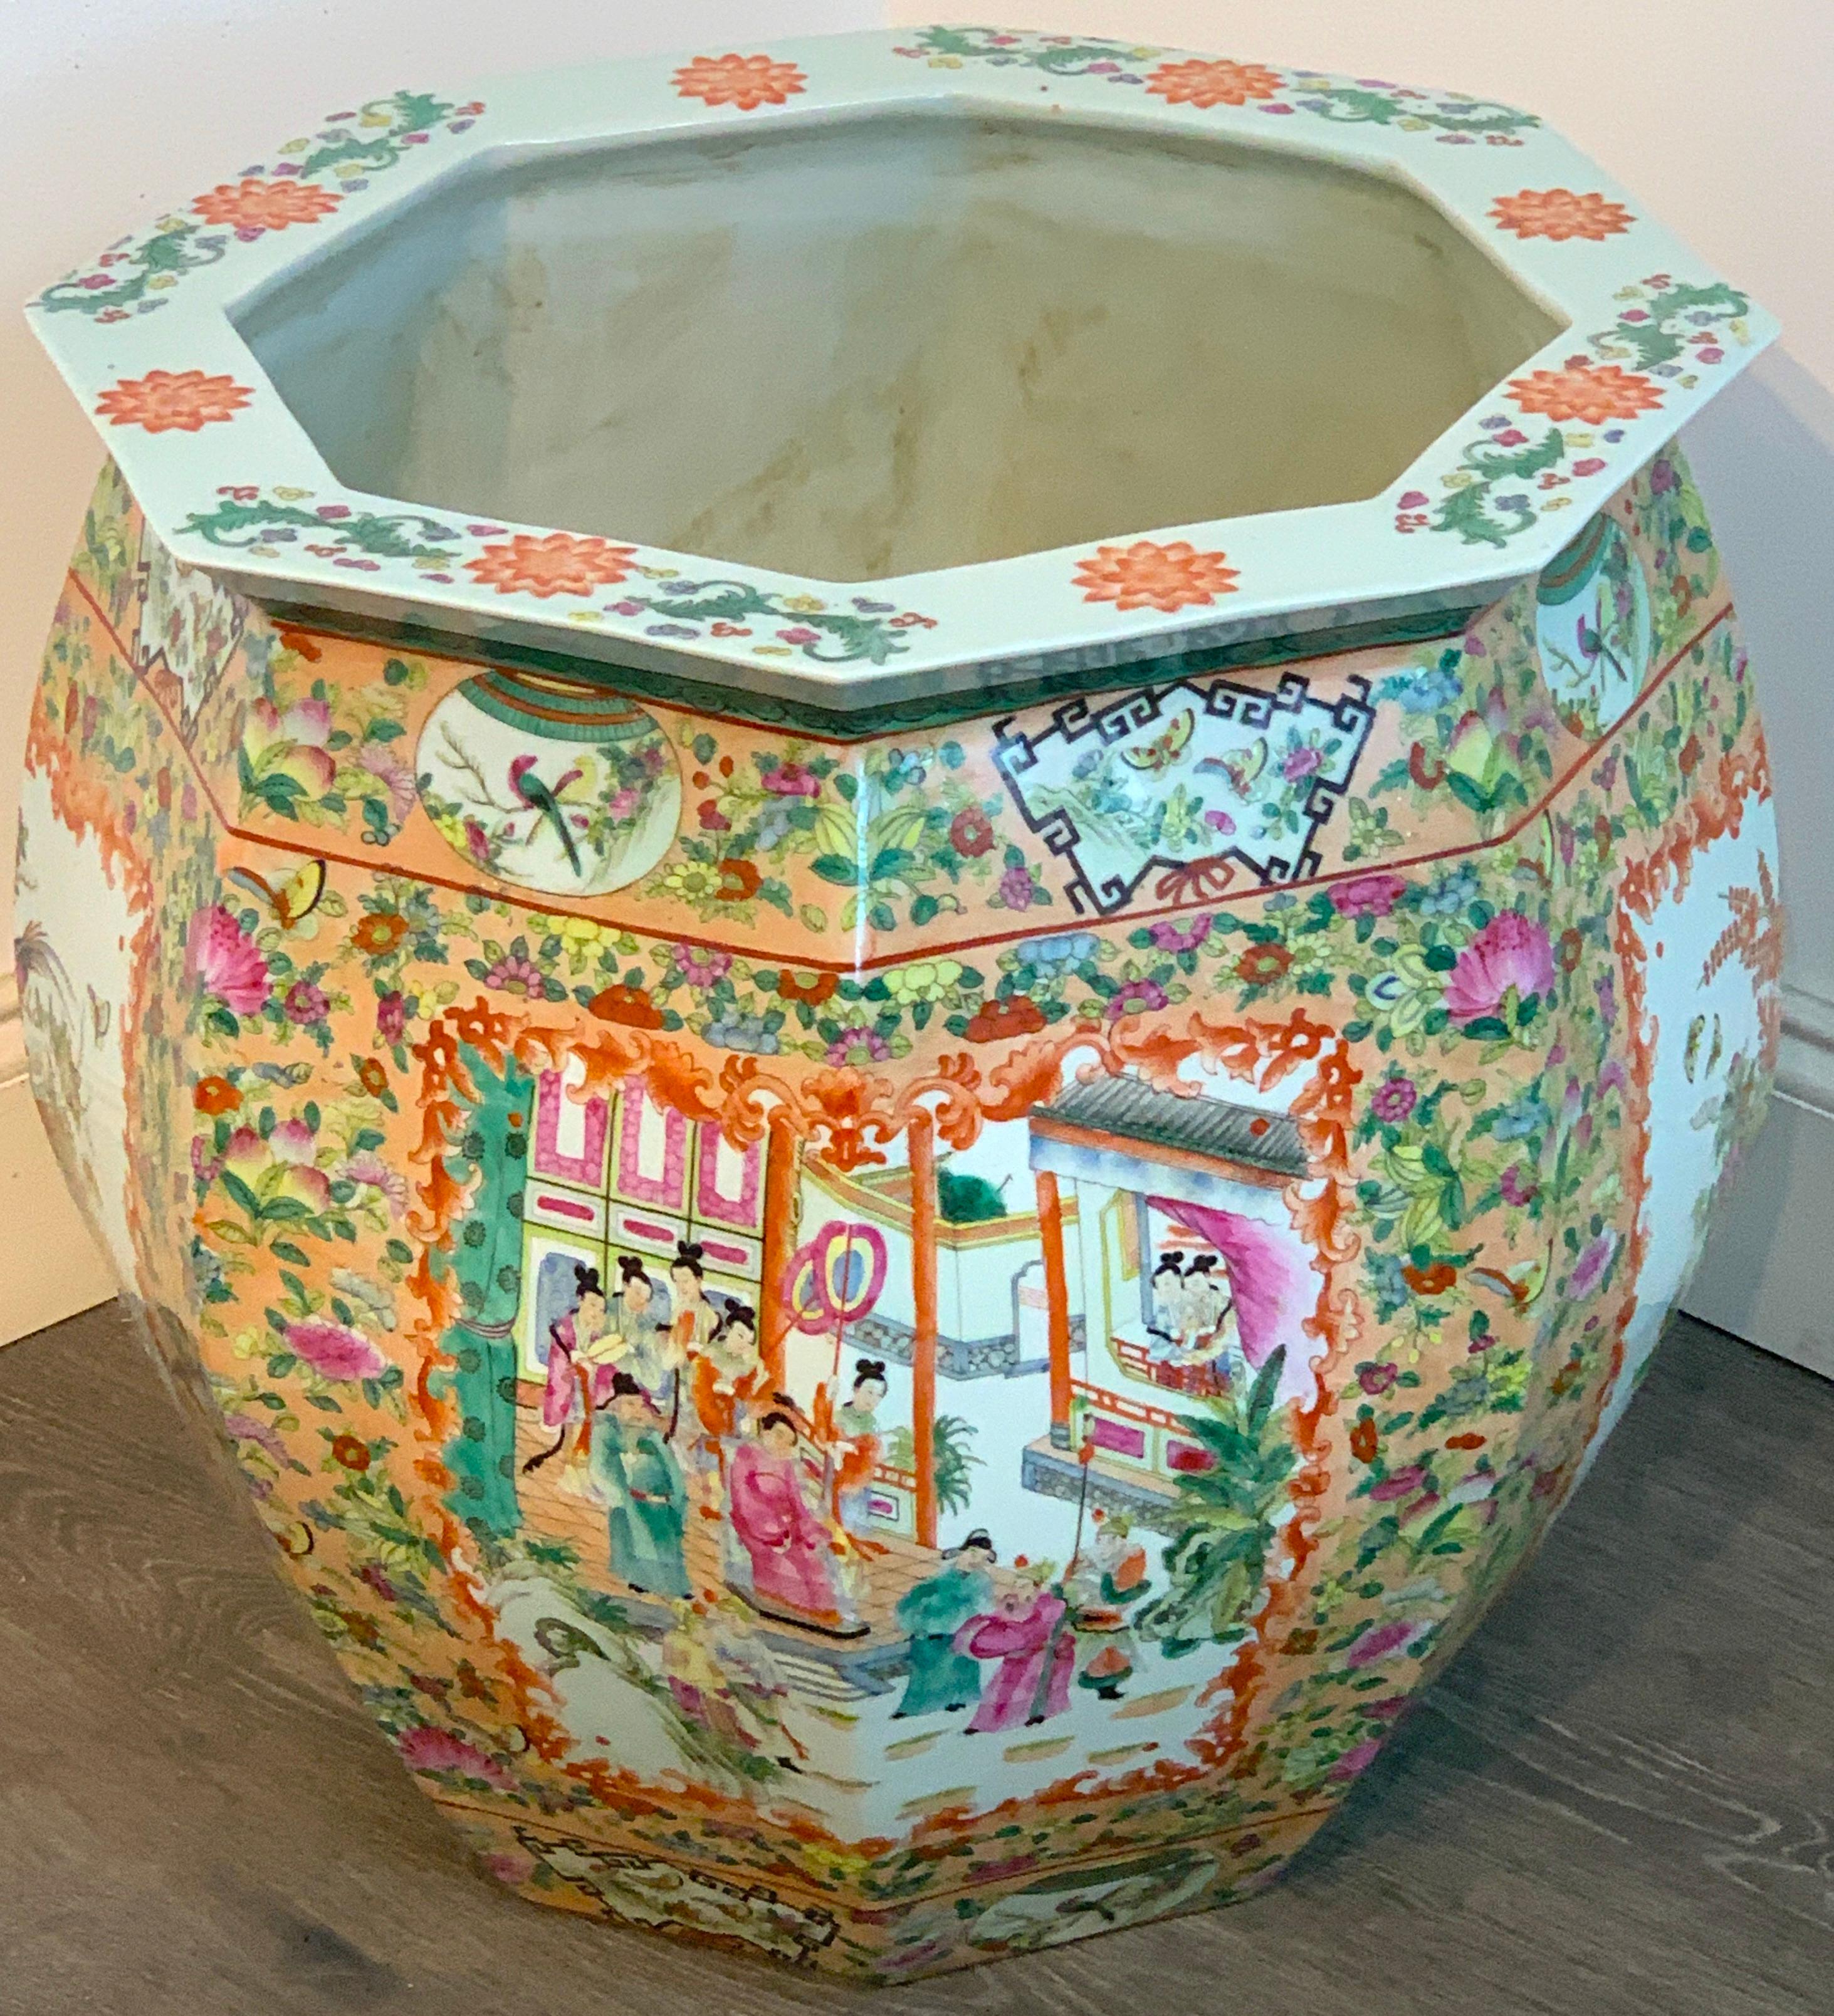 Chinese famille rose octagonal fish bowl/ jardinière, of large scale, beautifully painted with court scenes and floral vignettes. The interior diameter is 15